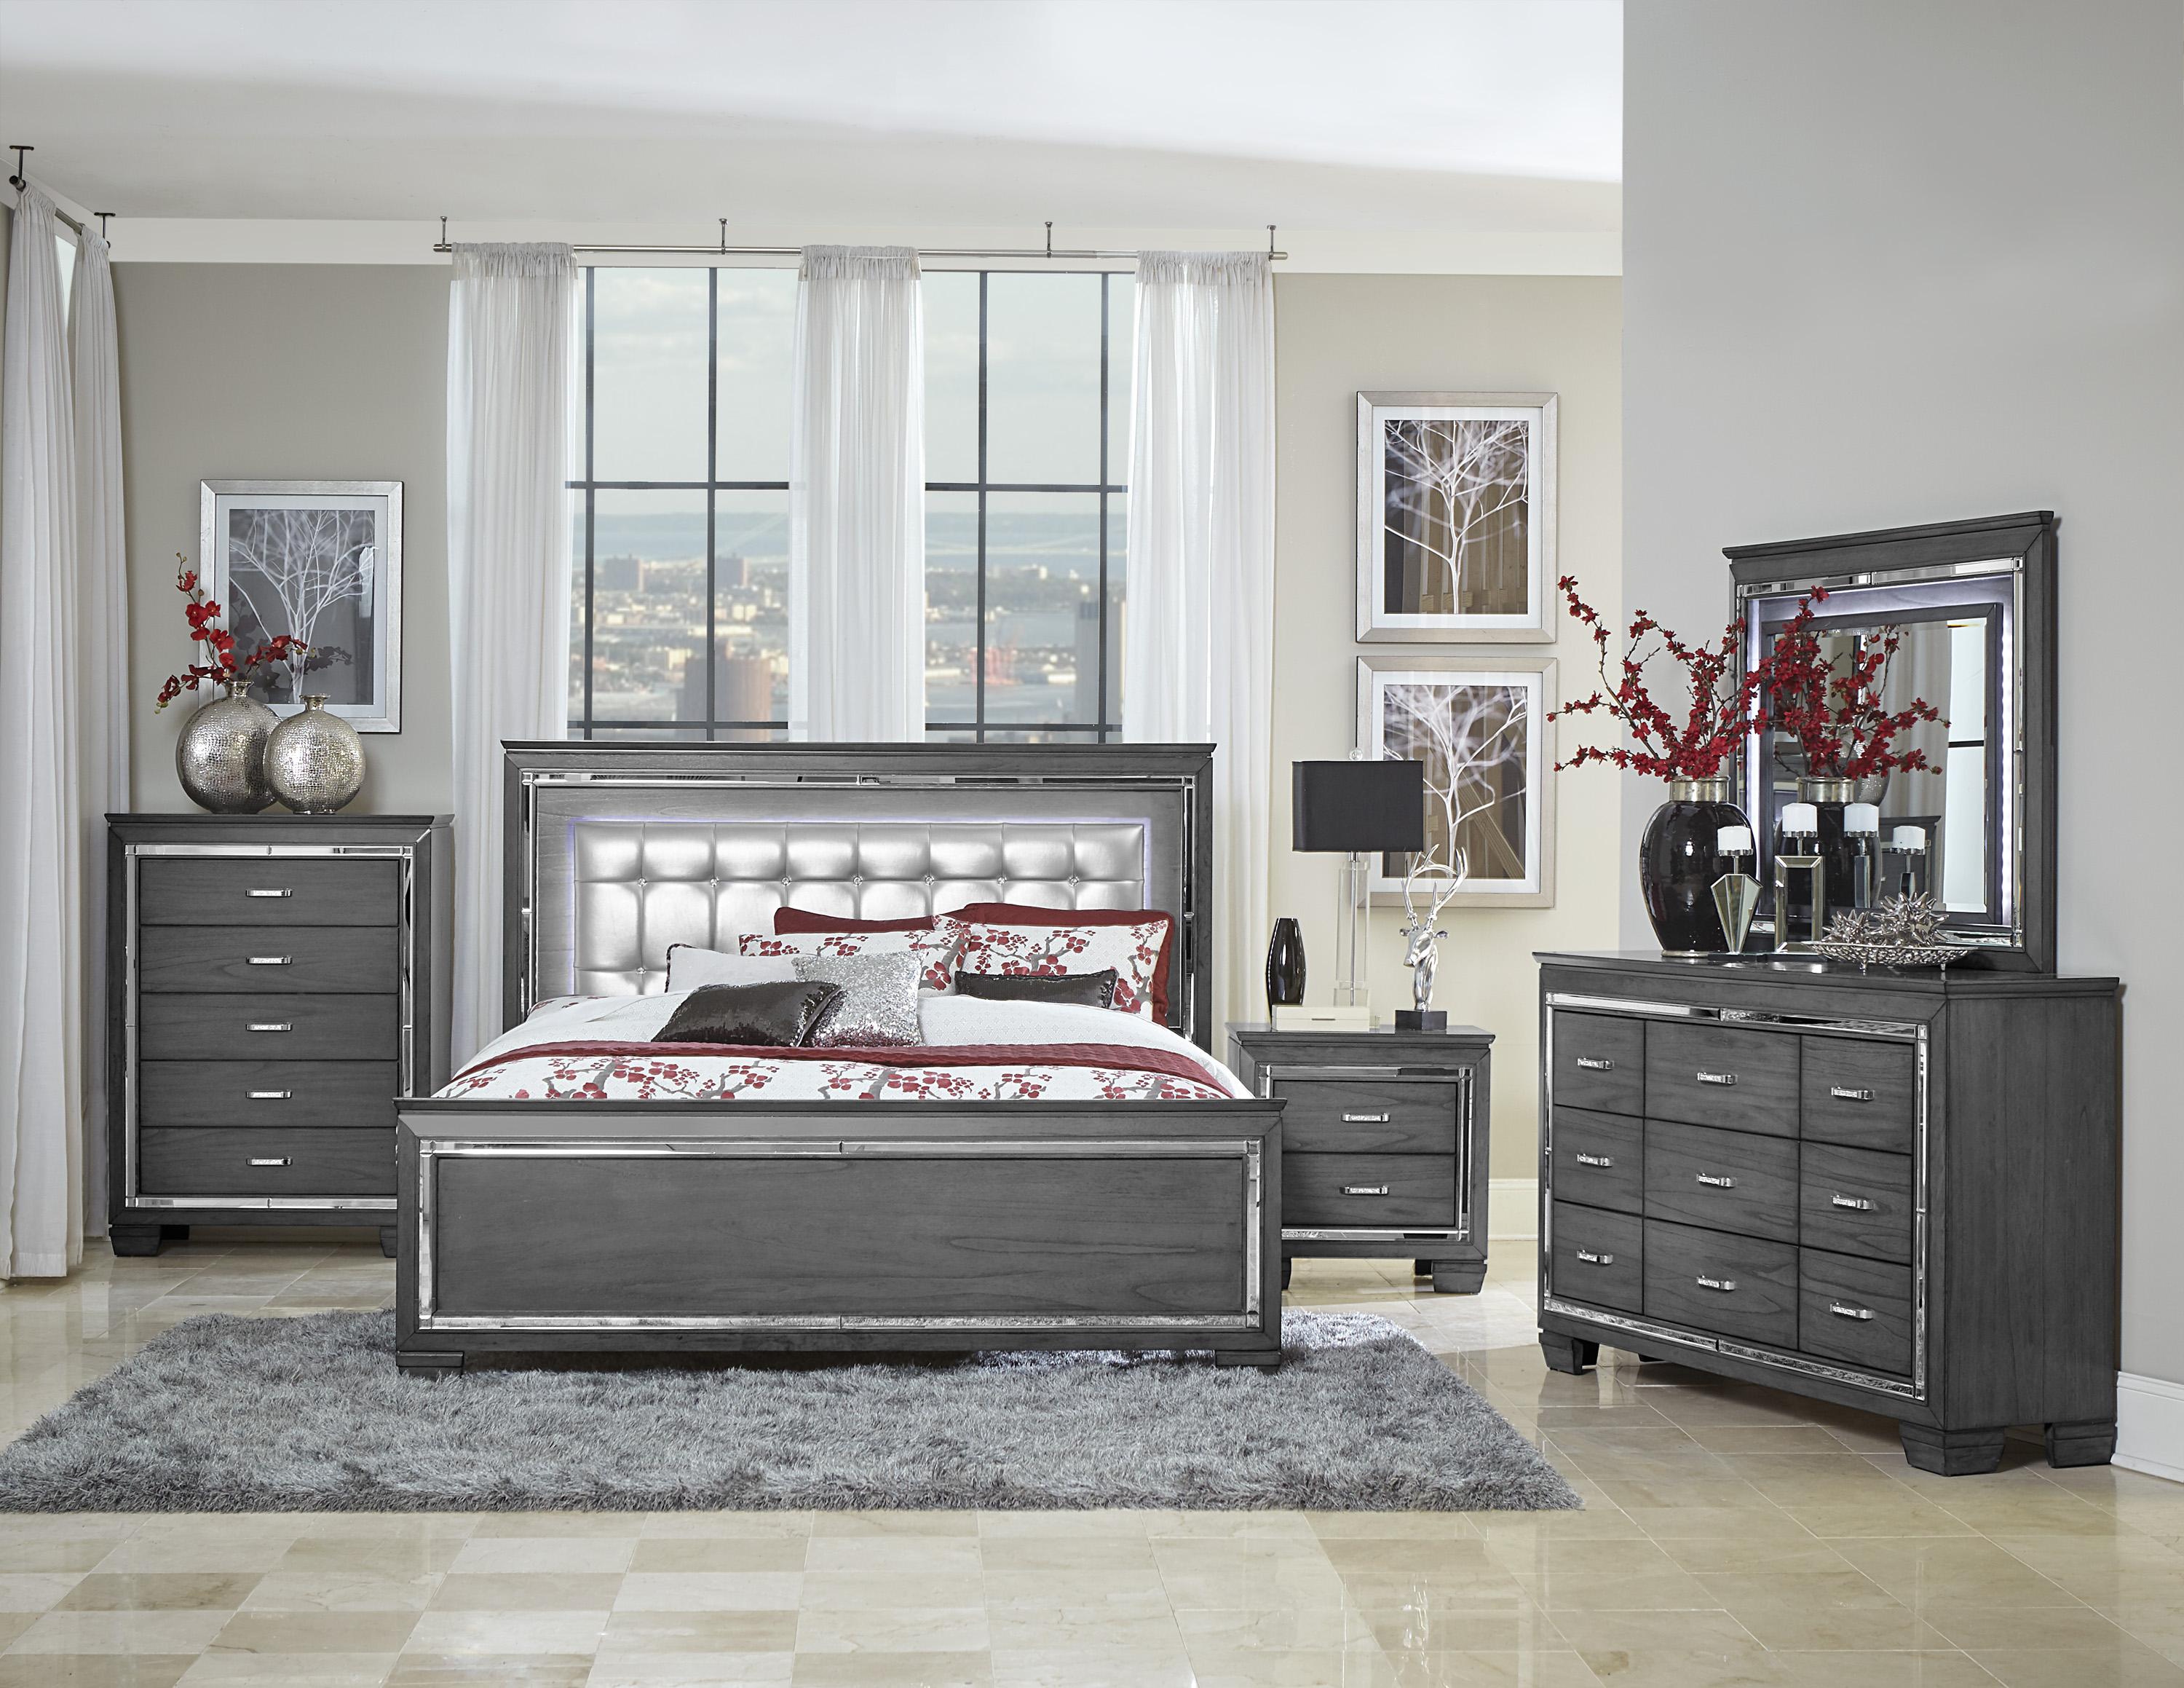 Modern Bedroom Set 1916KGY-1CK-6PC Allura 1916KGY-1CK-6PC in Gray Faux Leather